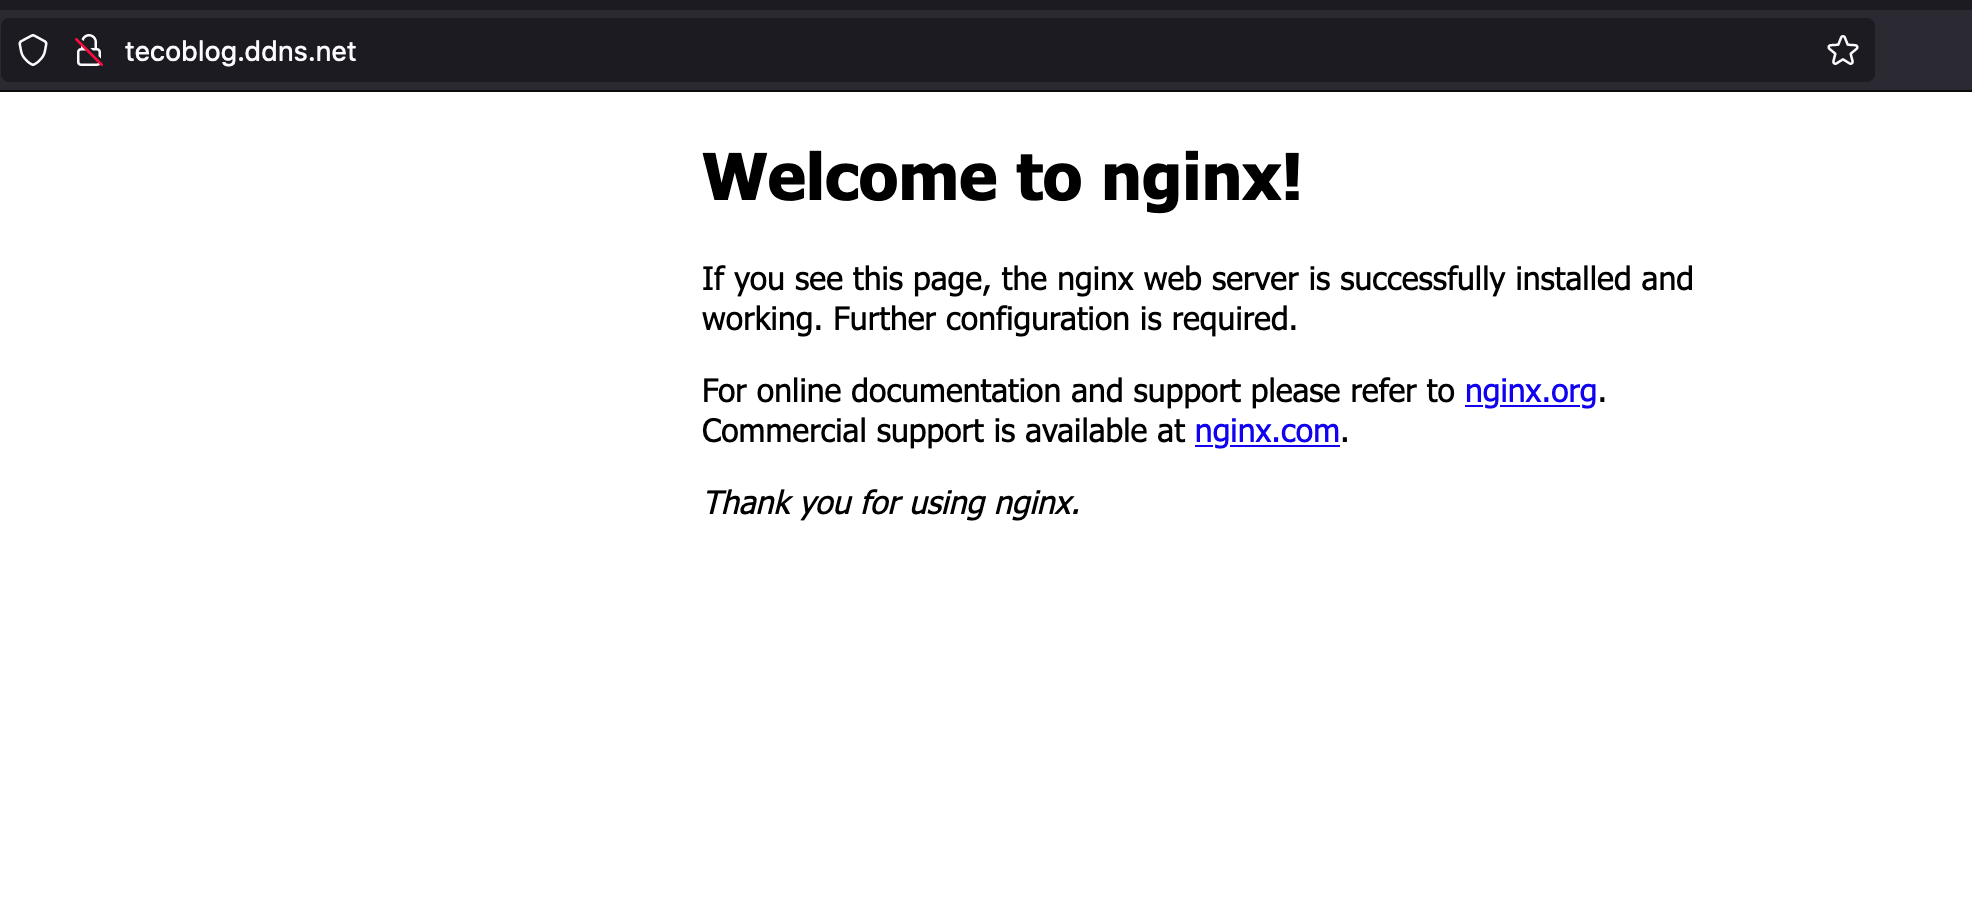 Nginx welcome page from the subdomain.